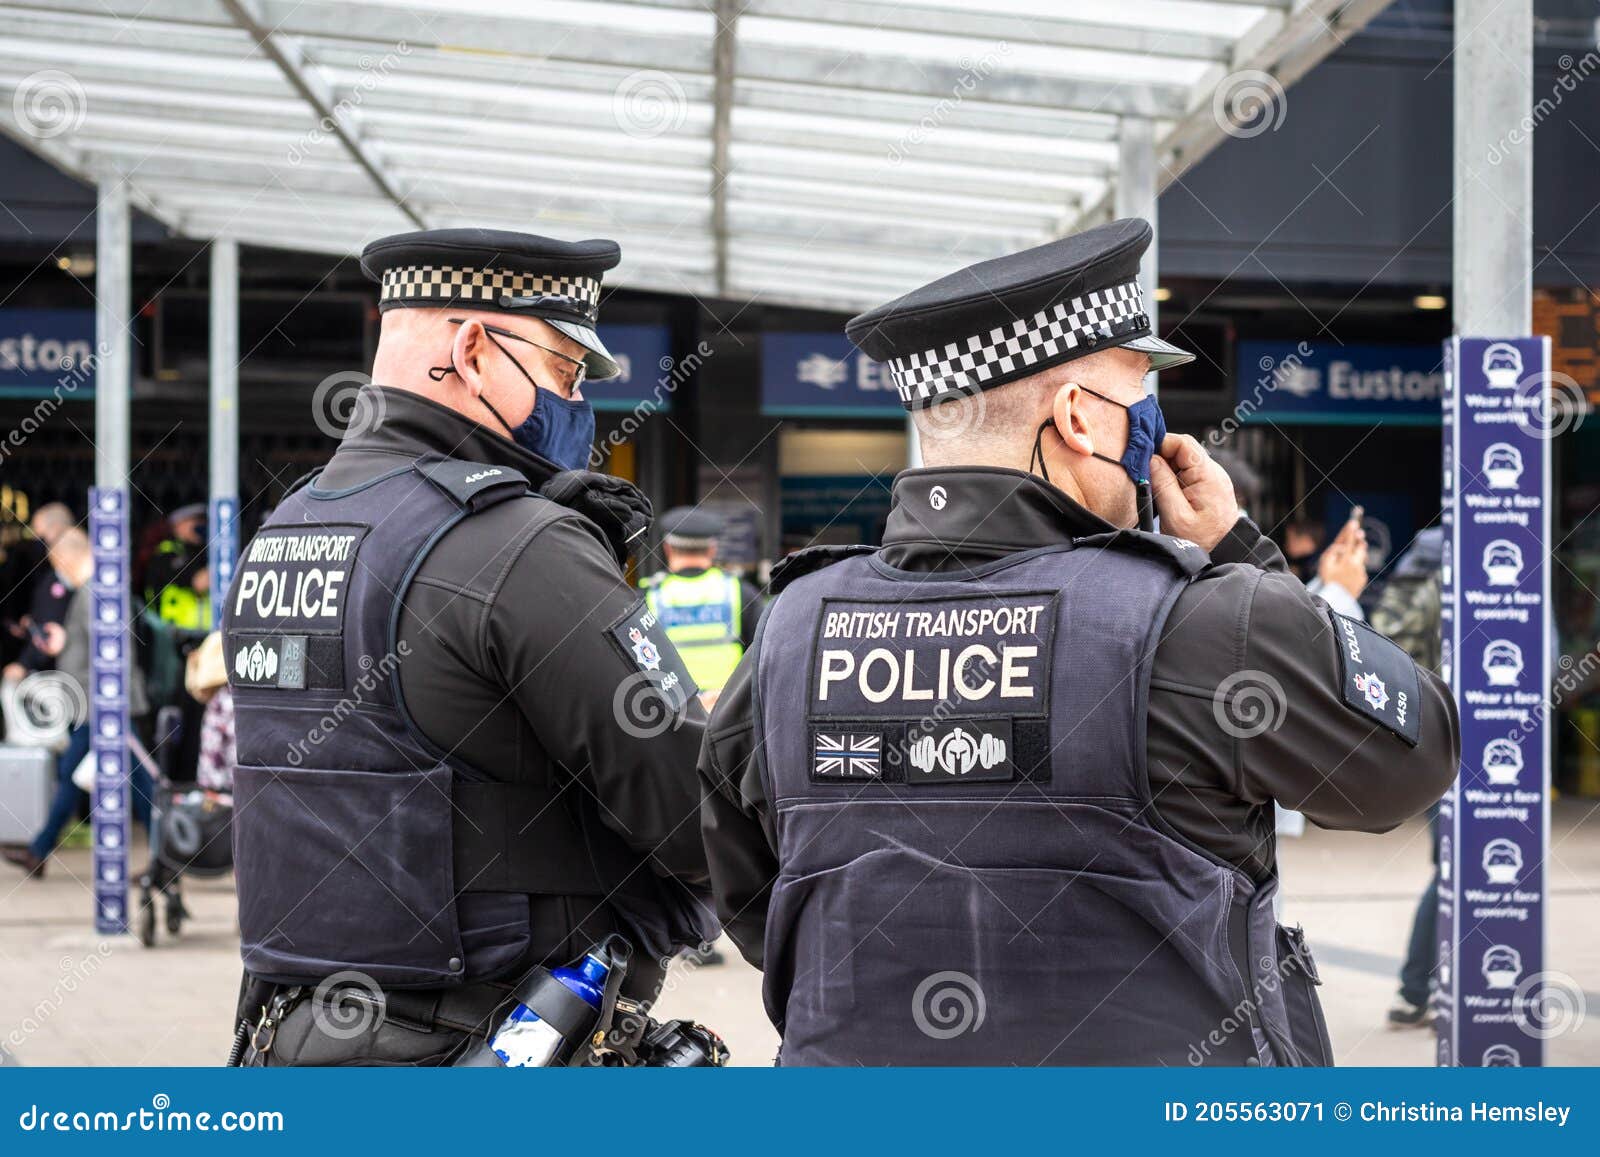 7,901 London Police Photos - Free  Royalty-Free Stock Photos from  Dreamstime